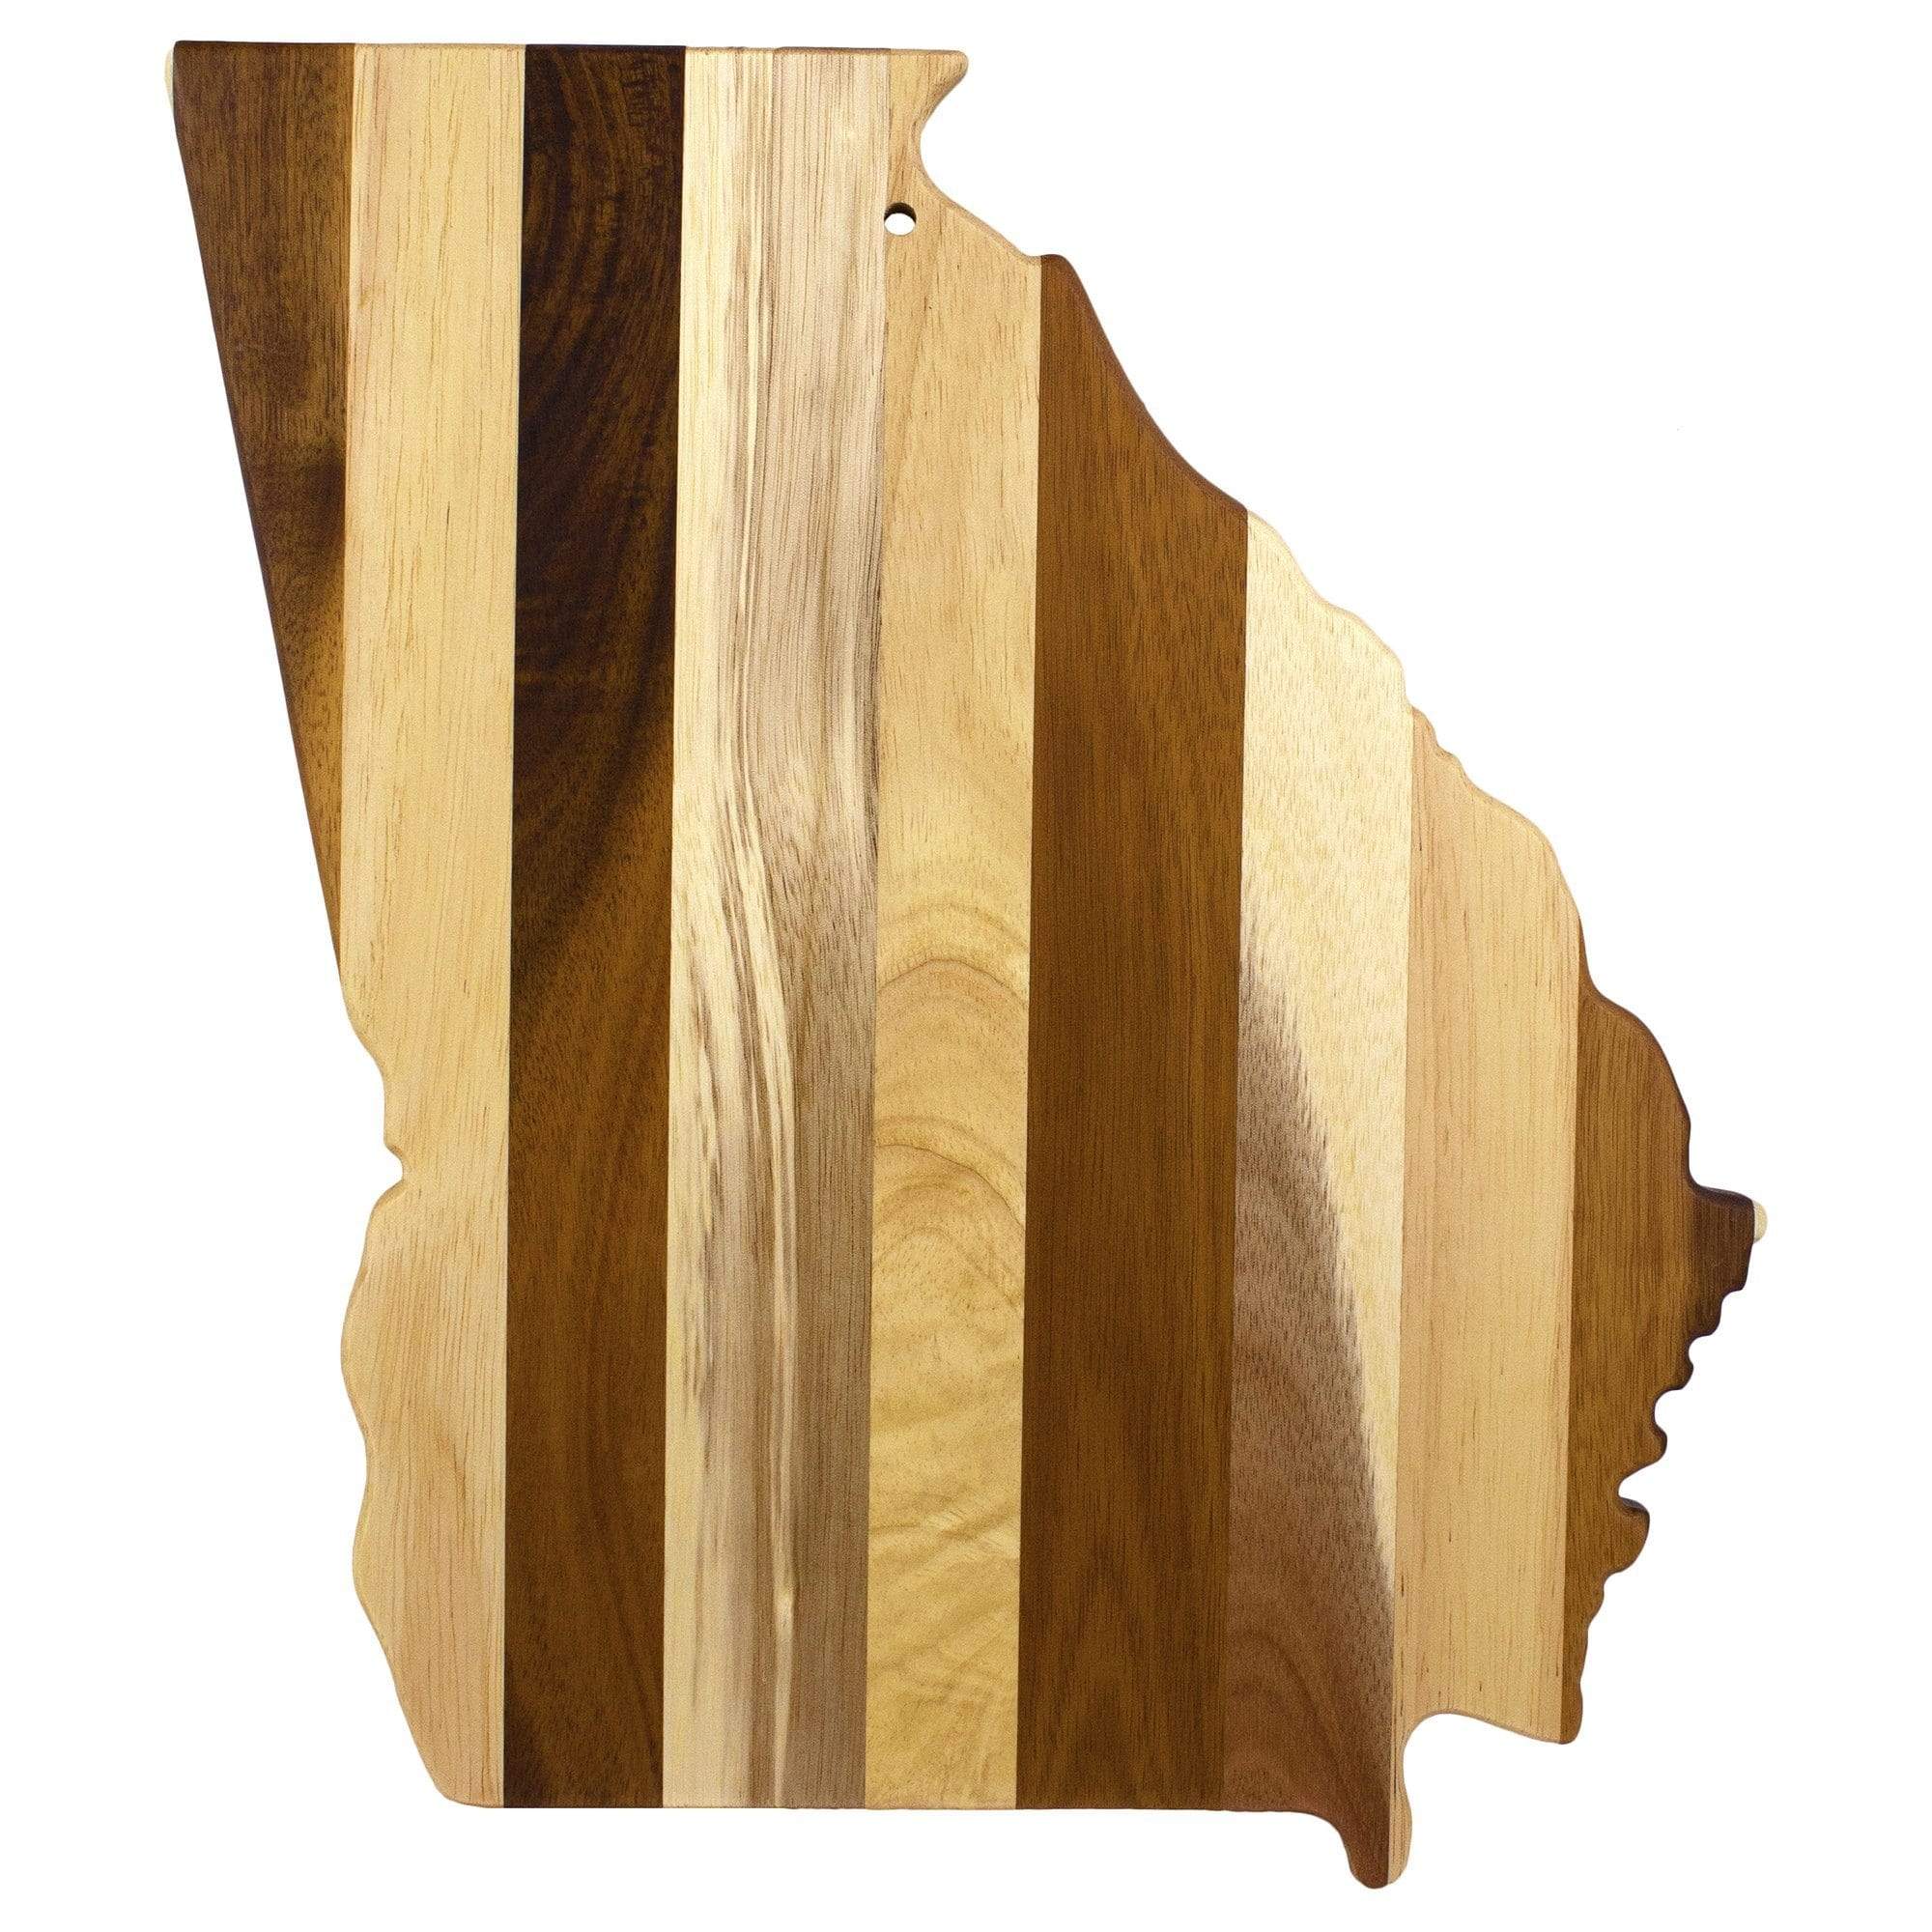 https://totallybamboo.com/cdn/shop/products/rock-branchr-shiplap-series-georgia-state-shaped-wood-serving-and-cutting-board-totally-bamboo-790615.jpg?v=1627883651